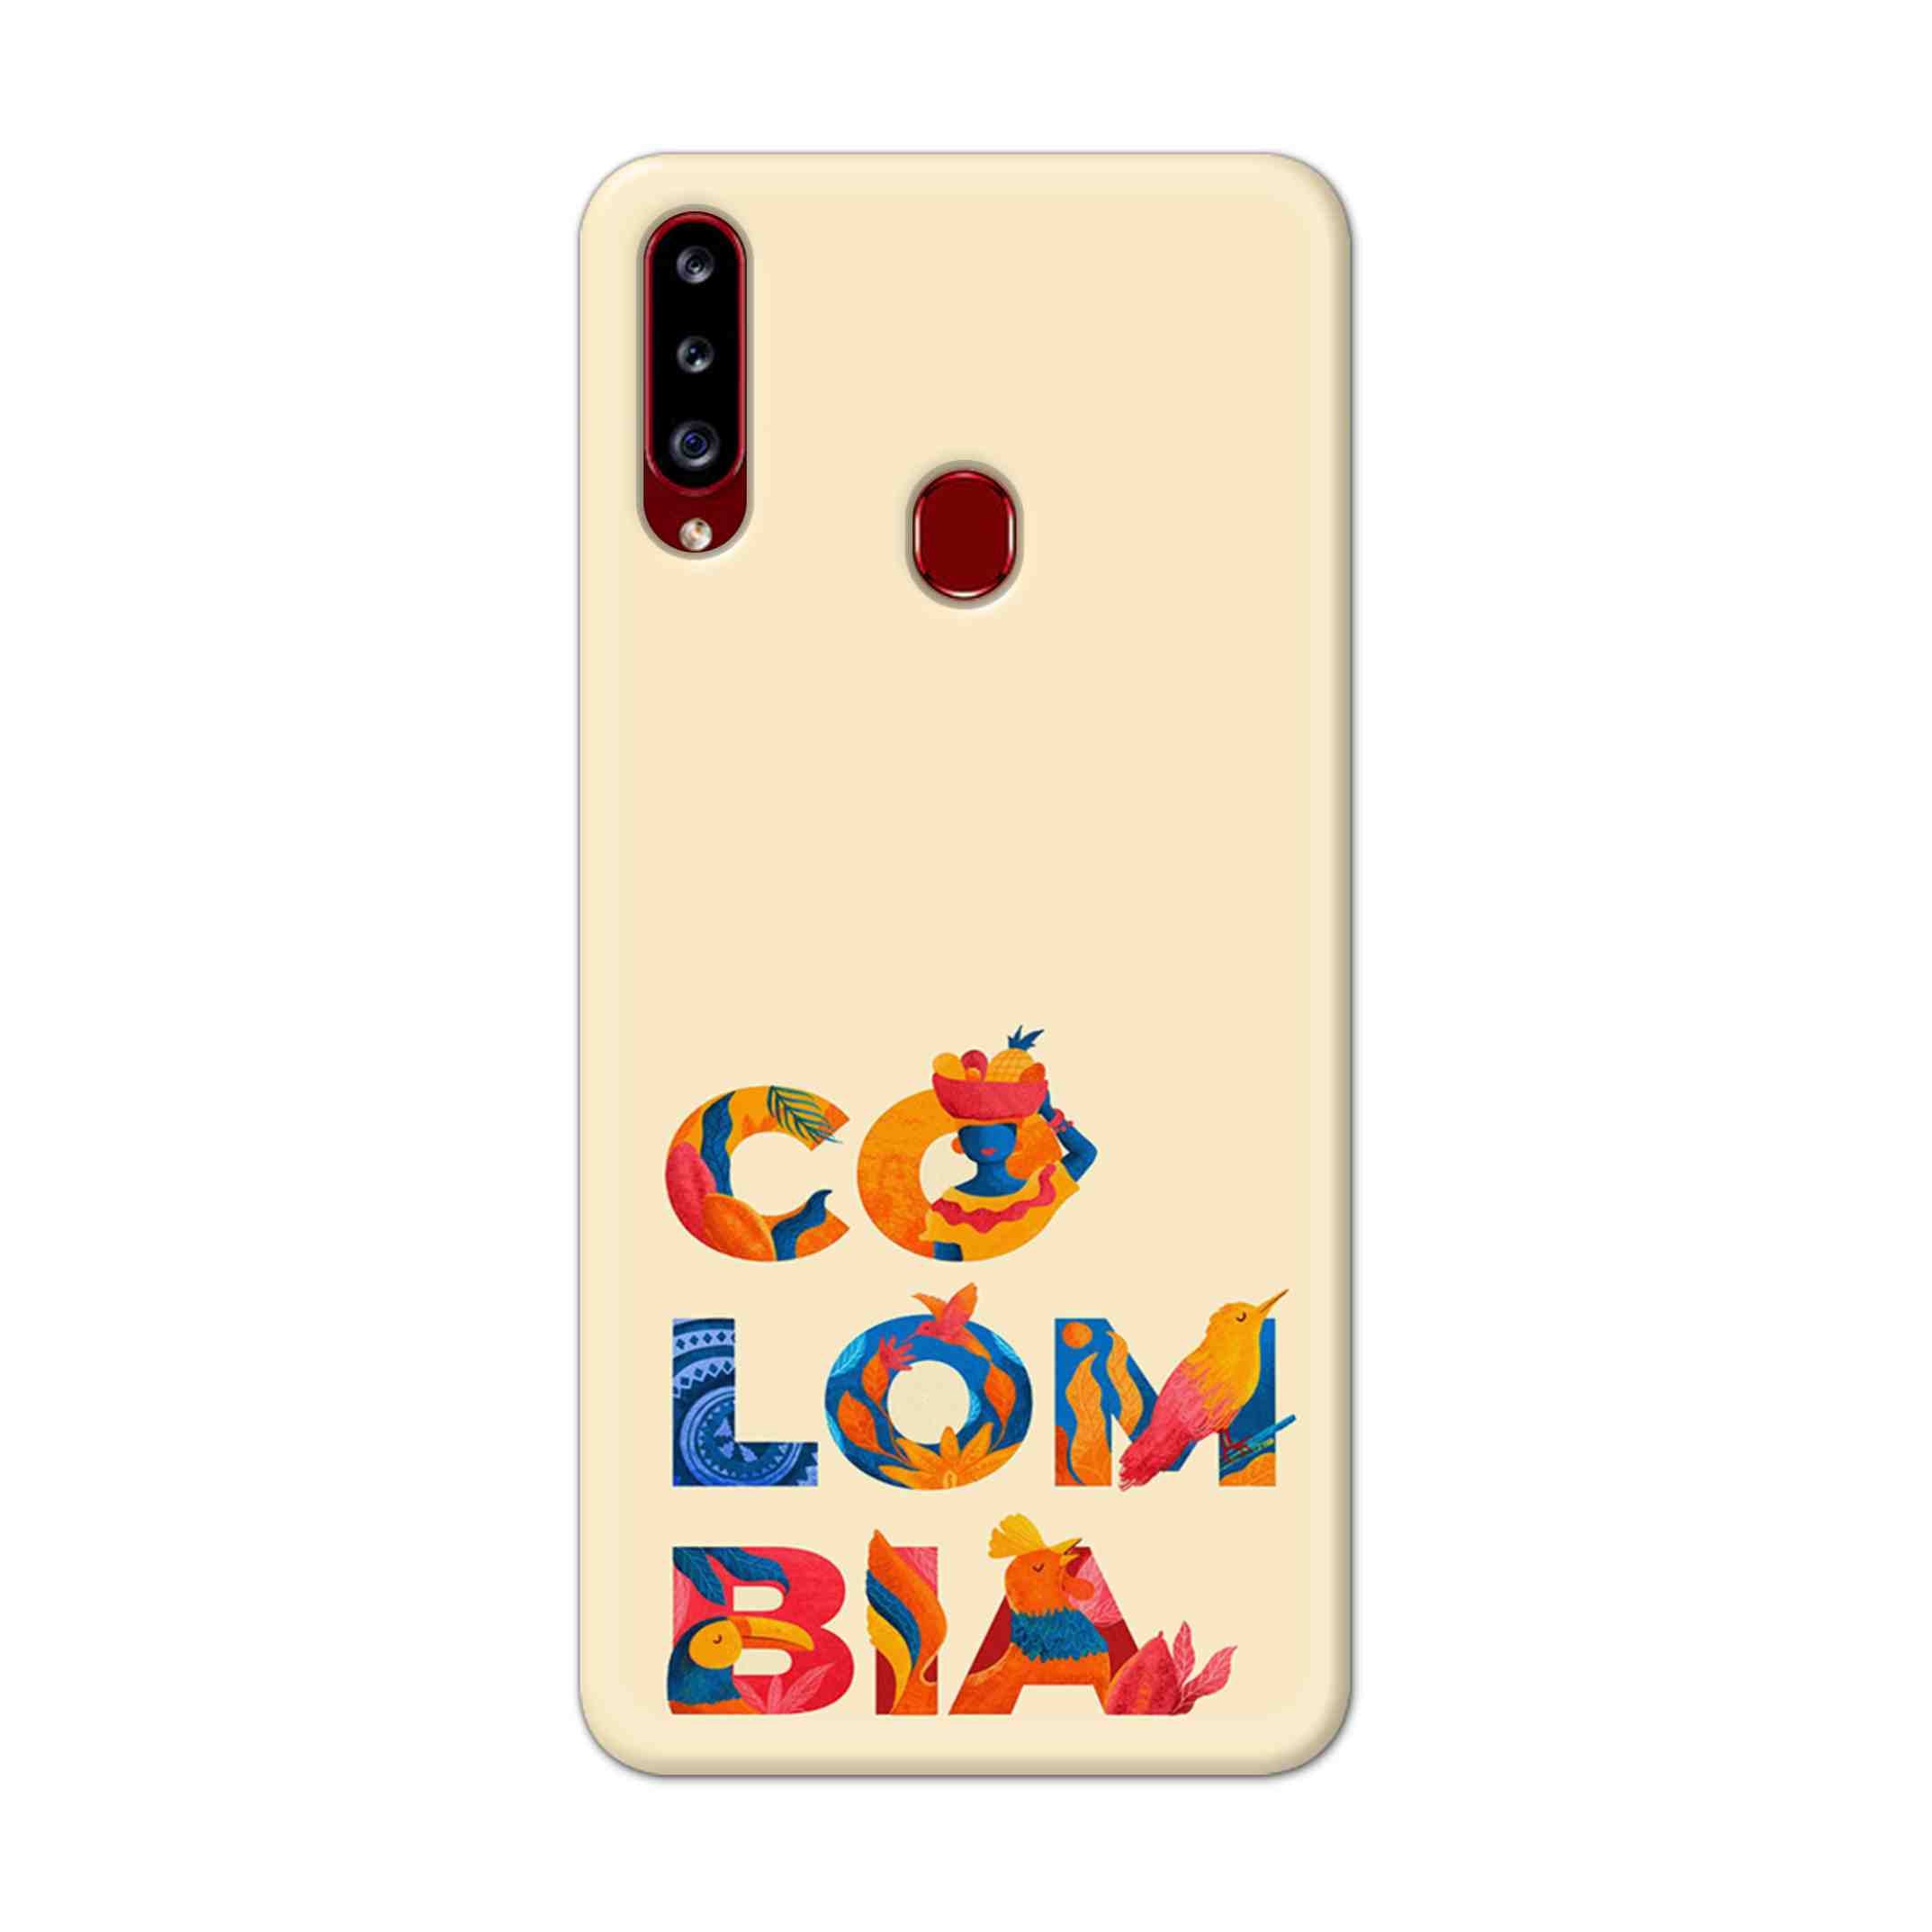 Buy Colombia Hard Back Mobile Phone Case Cover For Samsung A20s Online